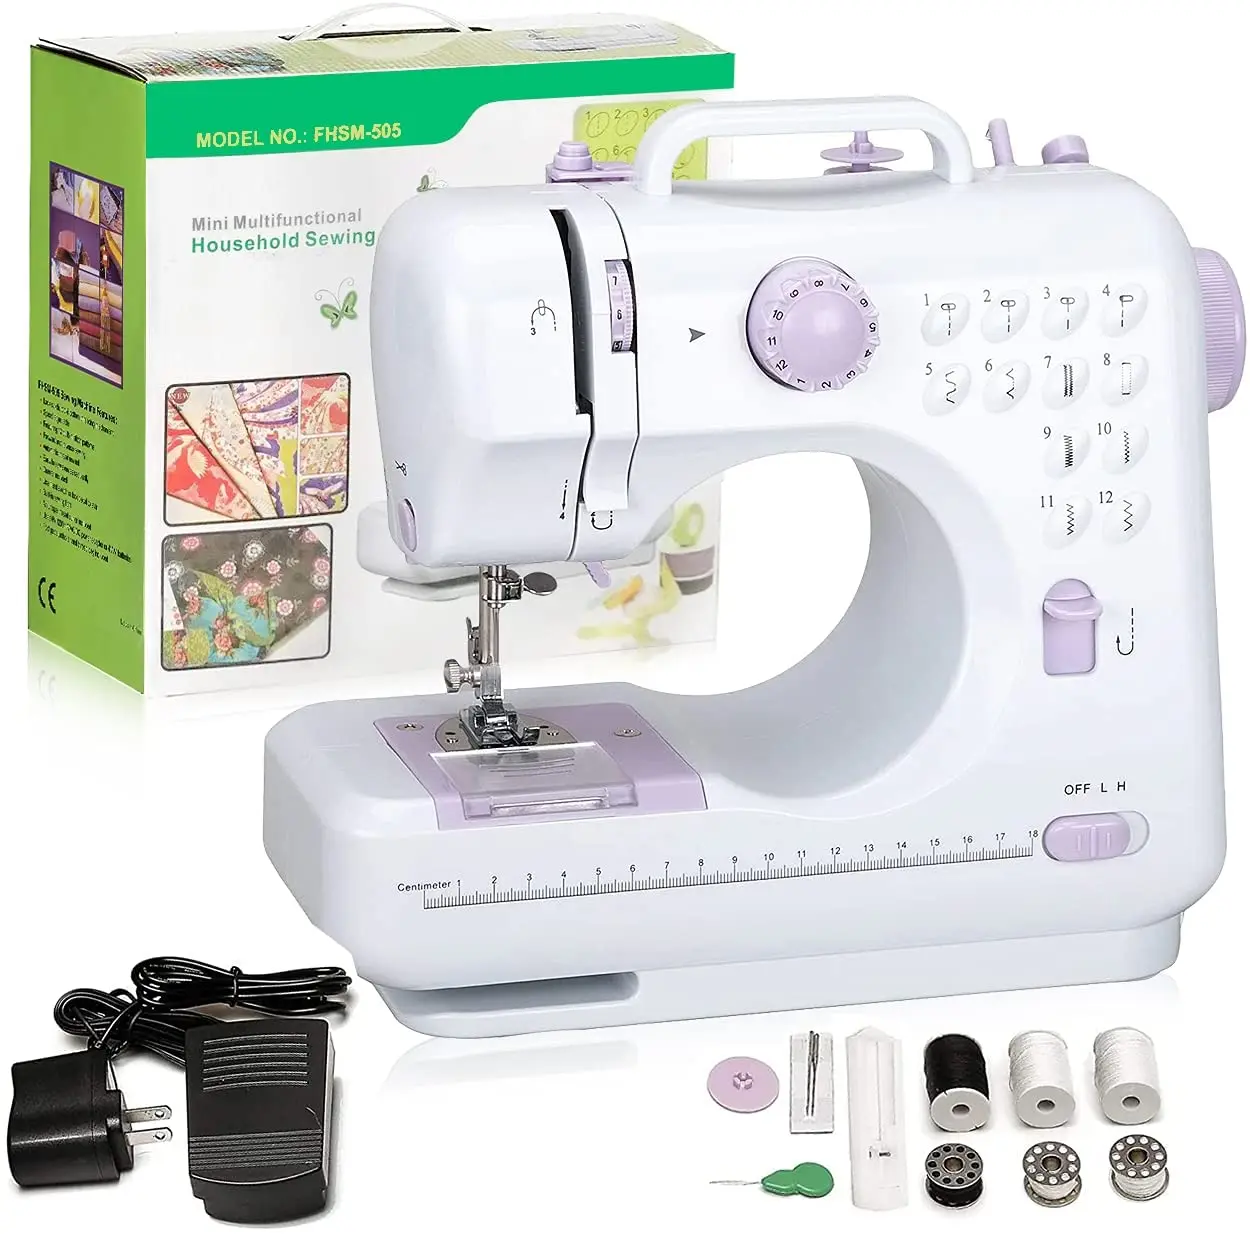 Kids Sewing Machine with 12 Built-In Stitches, Foot Pedal - Electronic